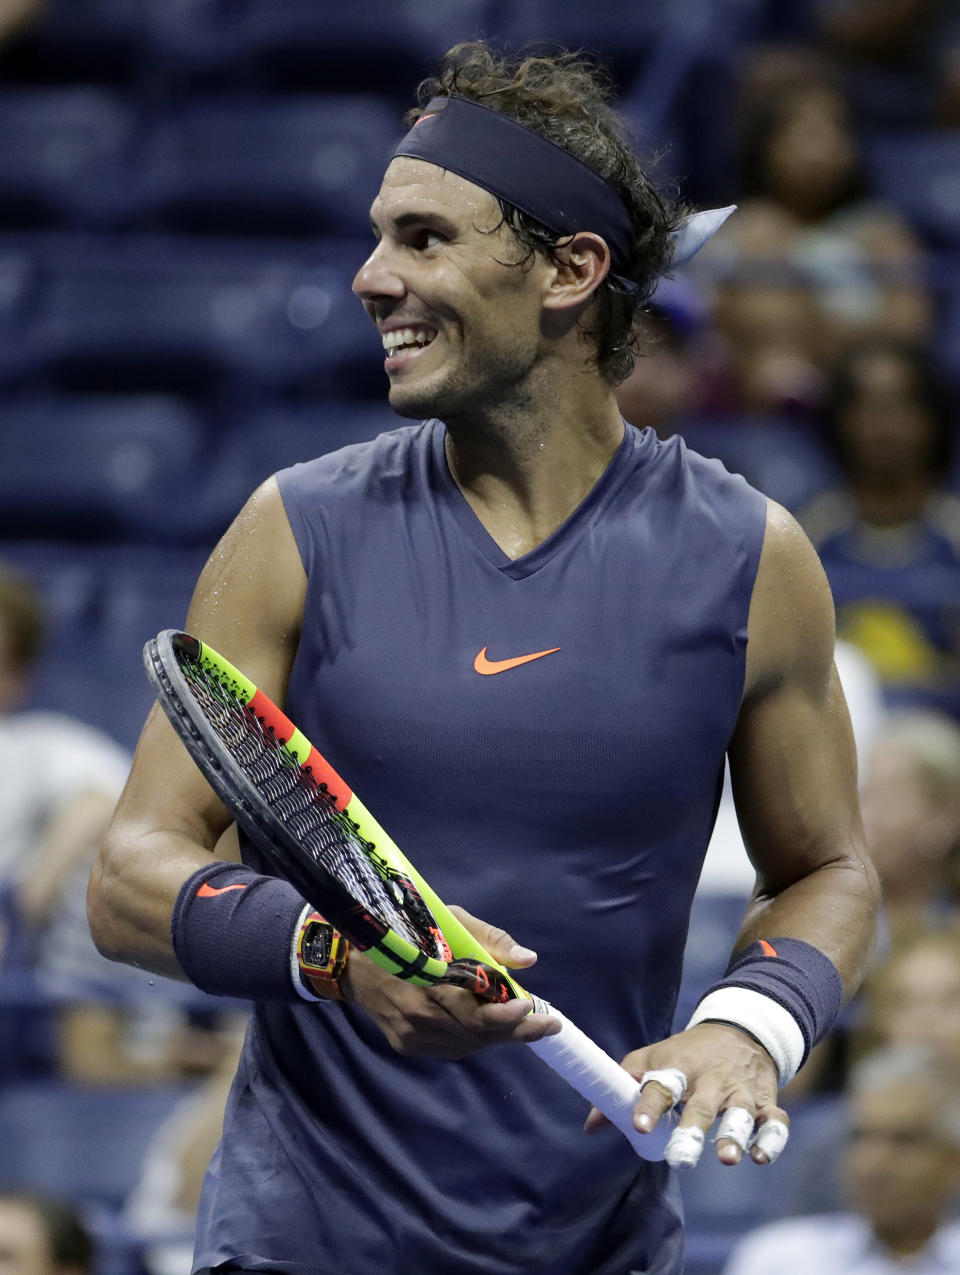 Rafael Nadal, of Spain, reacts after talking to the chair umpire after receiving a warning for letting the serve clock expire during his second-round match against Vasek Pospisil, of Canada, at the U.S. Open tennis tournament, Wednesday, Aug. 29, 2018, in New York. (AP Photo/Julio Cortez)